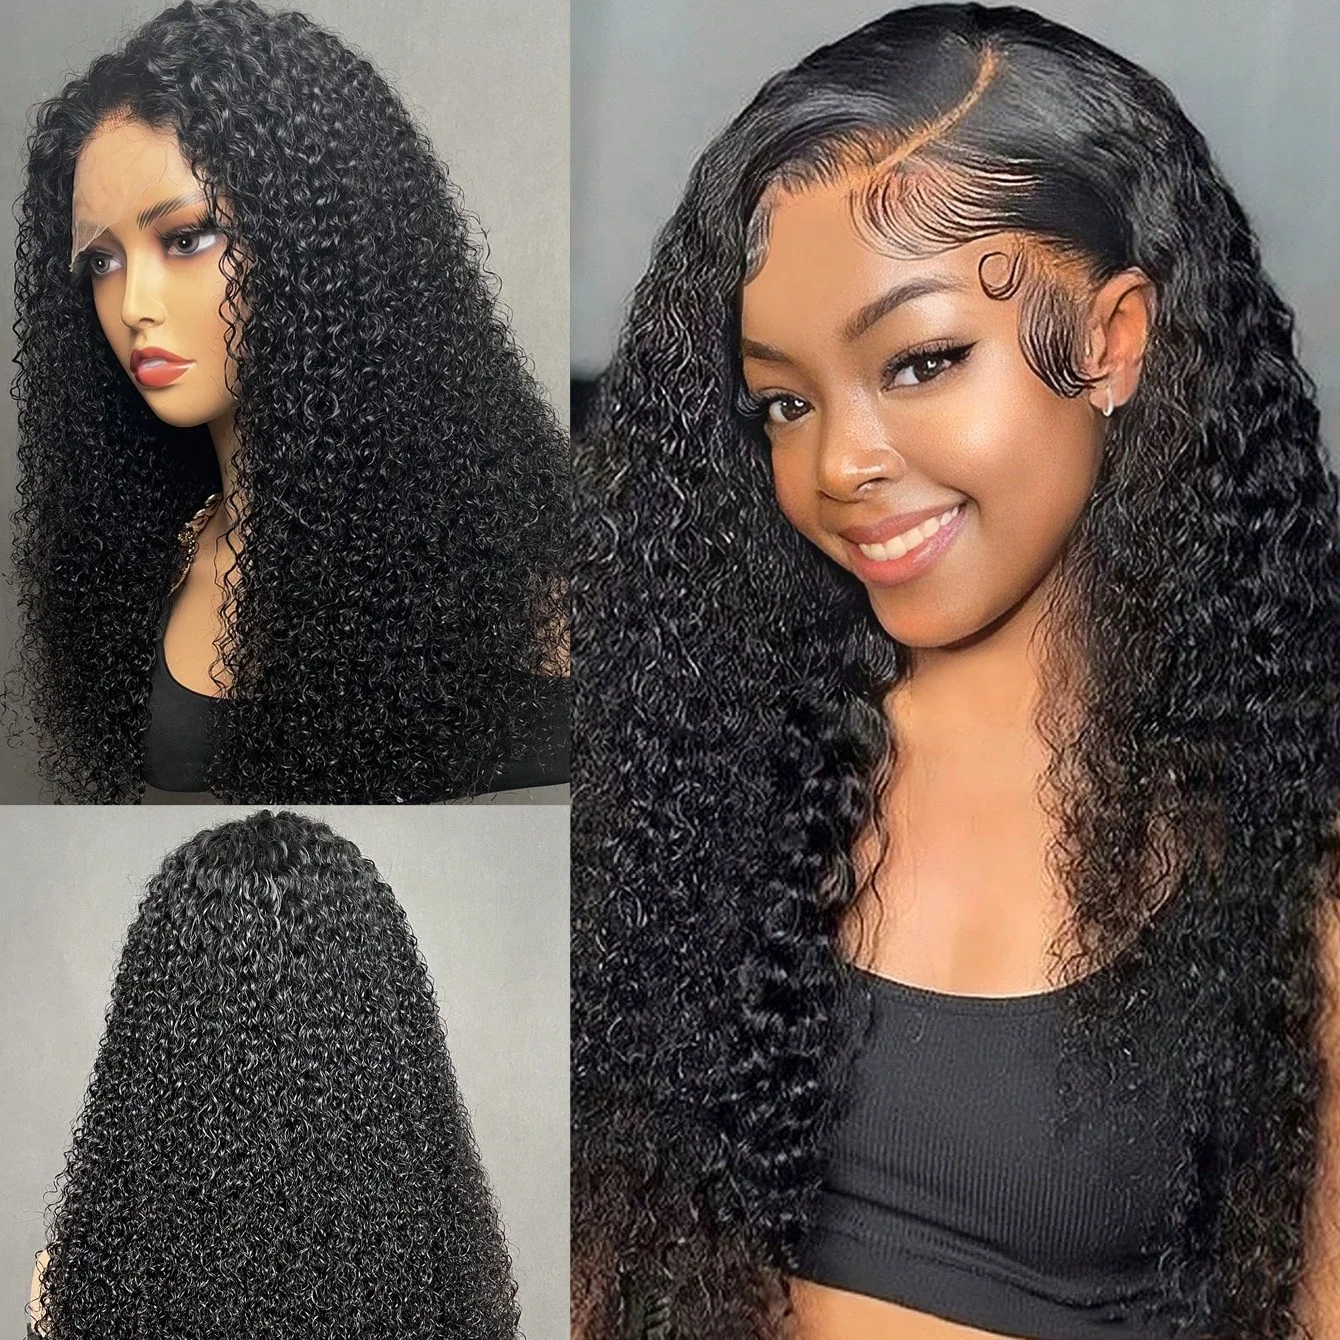 

Lace Kinky Curly Lace Frontal Wig 180% Density Black Color Pre-Plucked Natural Hairline Lace Human Hair Quality Wig for Women